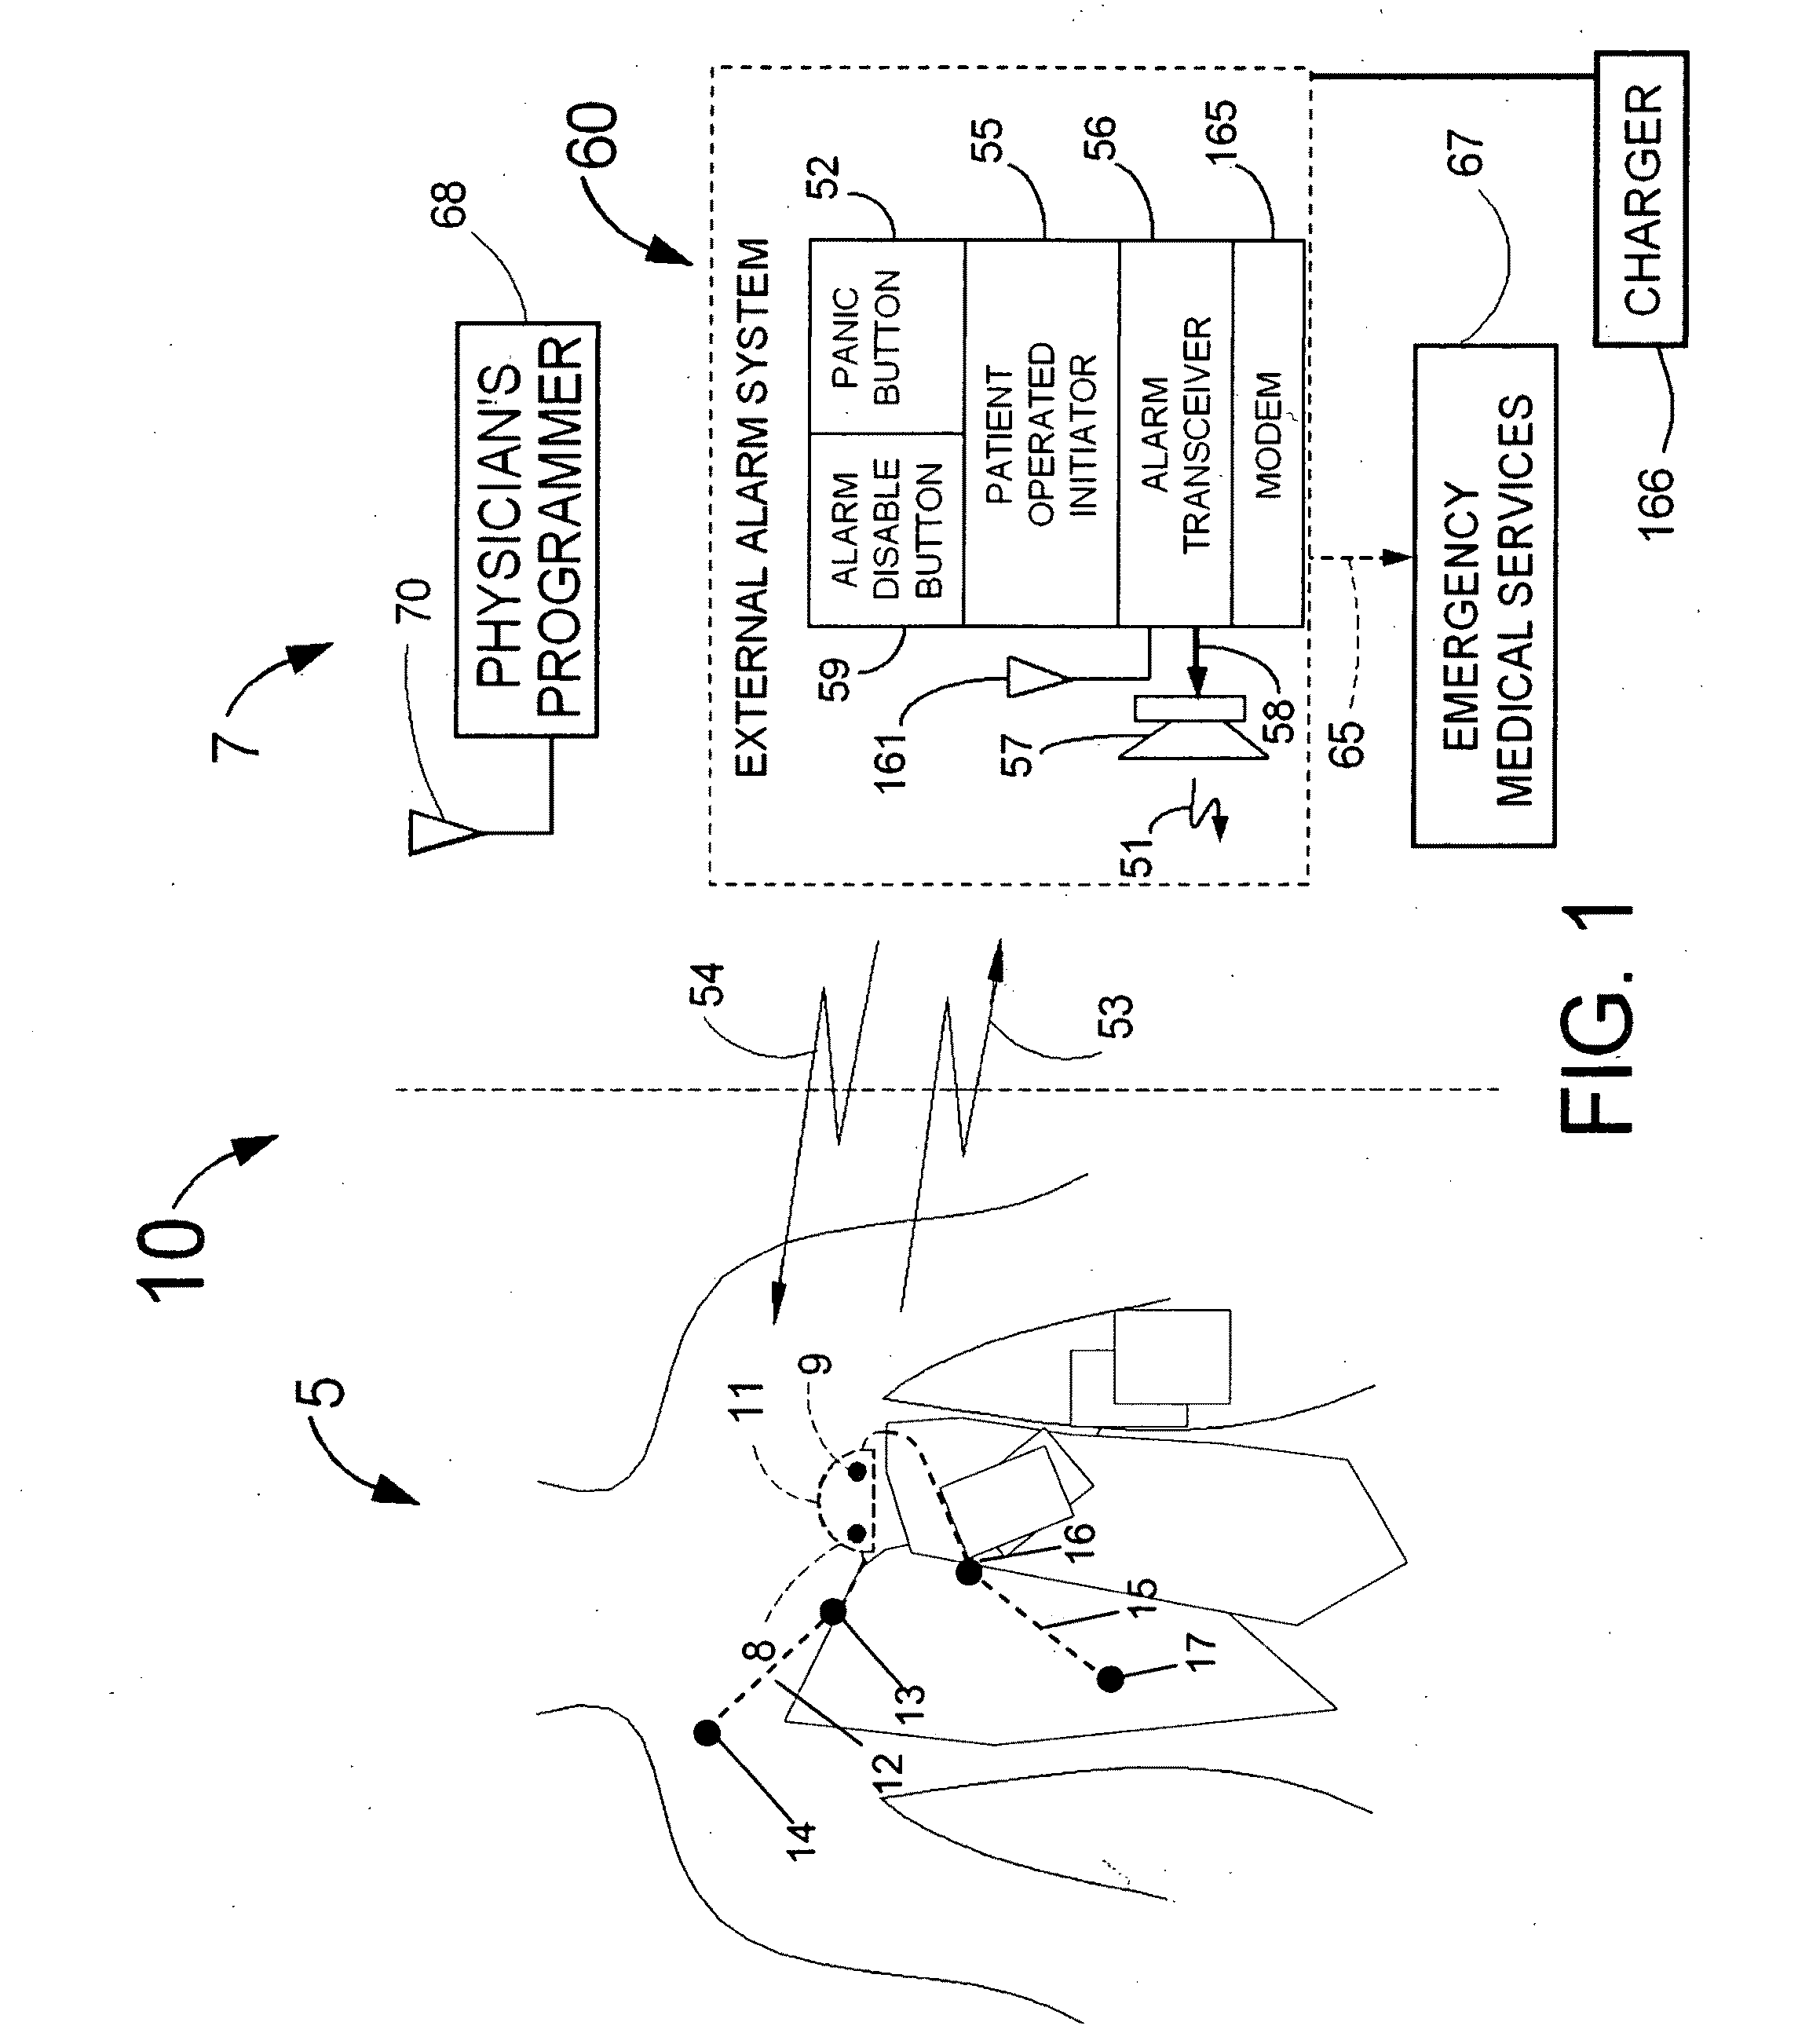 Heart rate correction system and methods for the detection of cardiac events